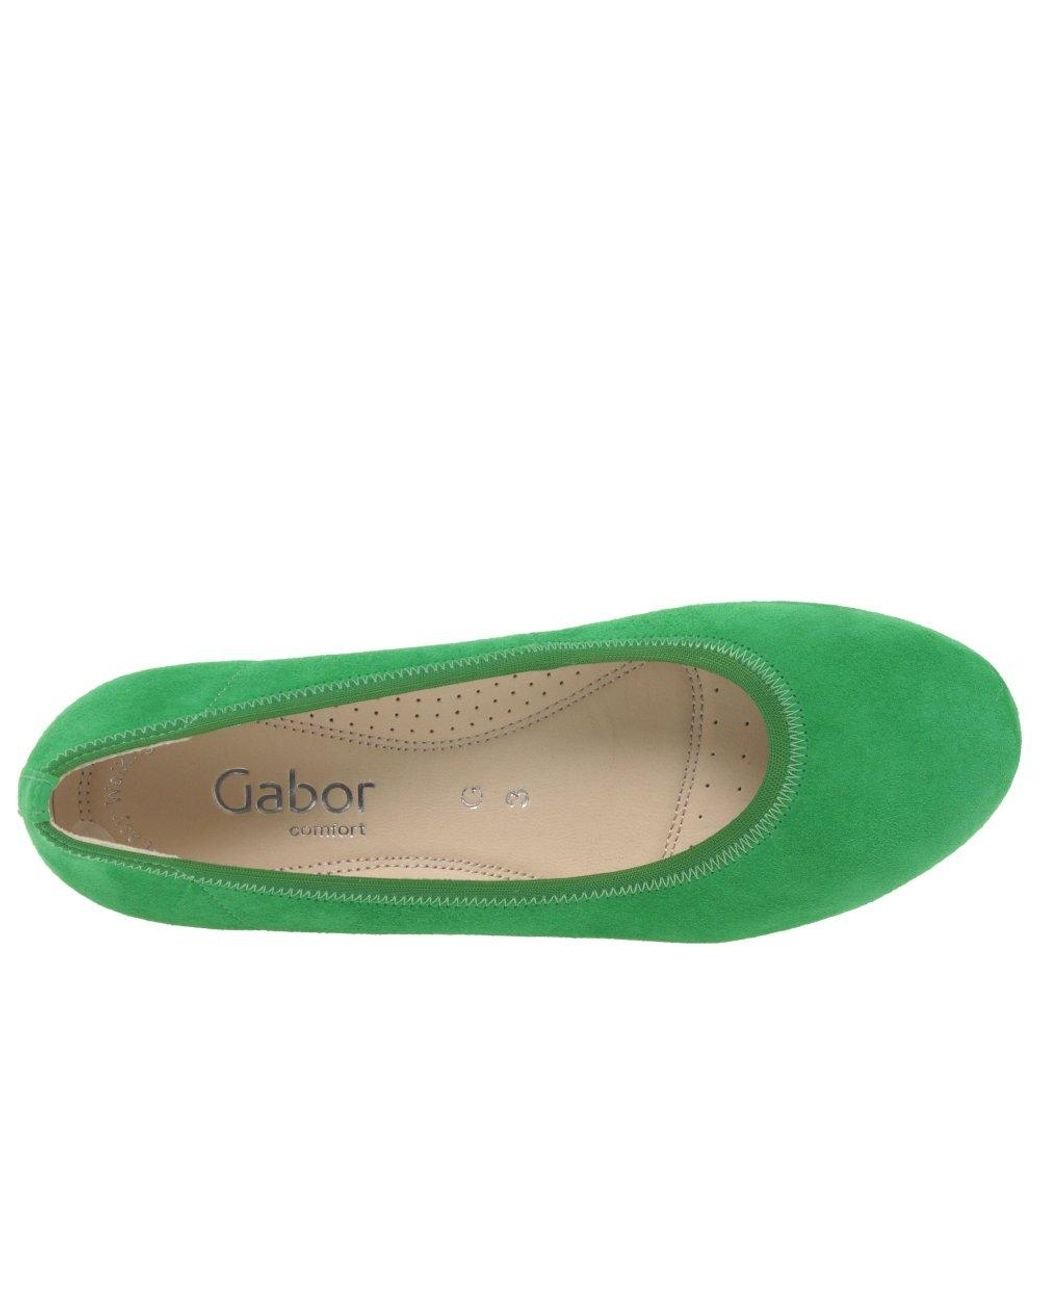 Gabor Epworth Low Wedge Heeled Shoes in Green | Lyst Canada